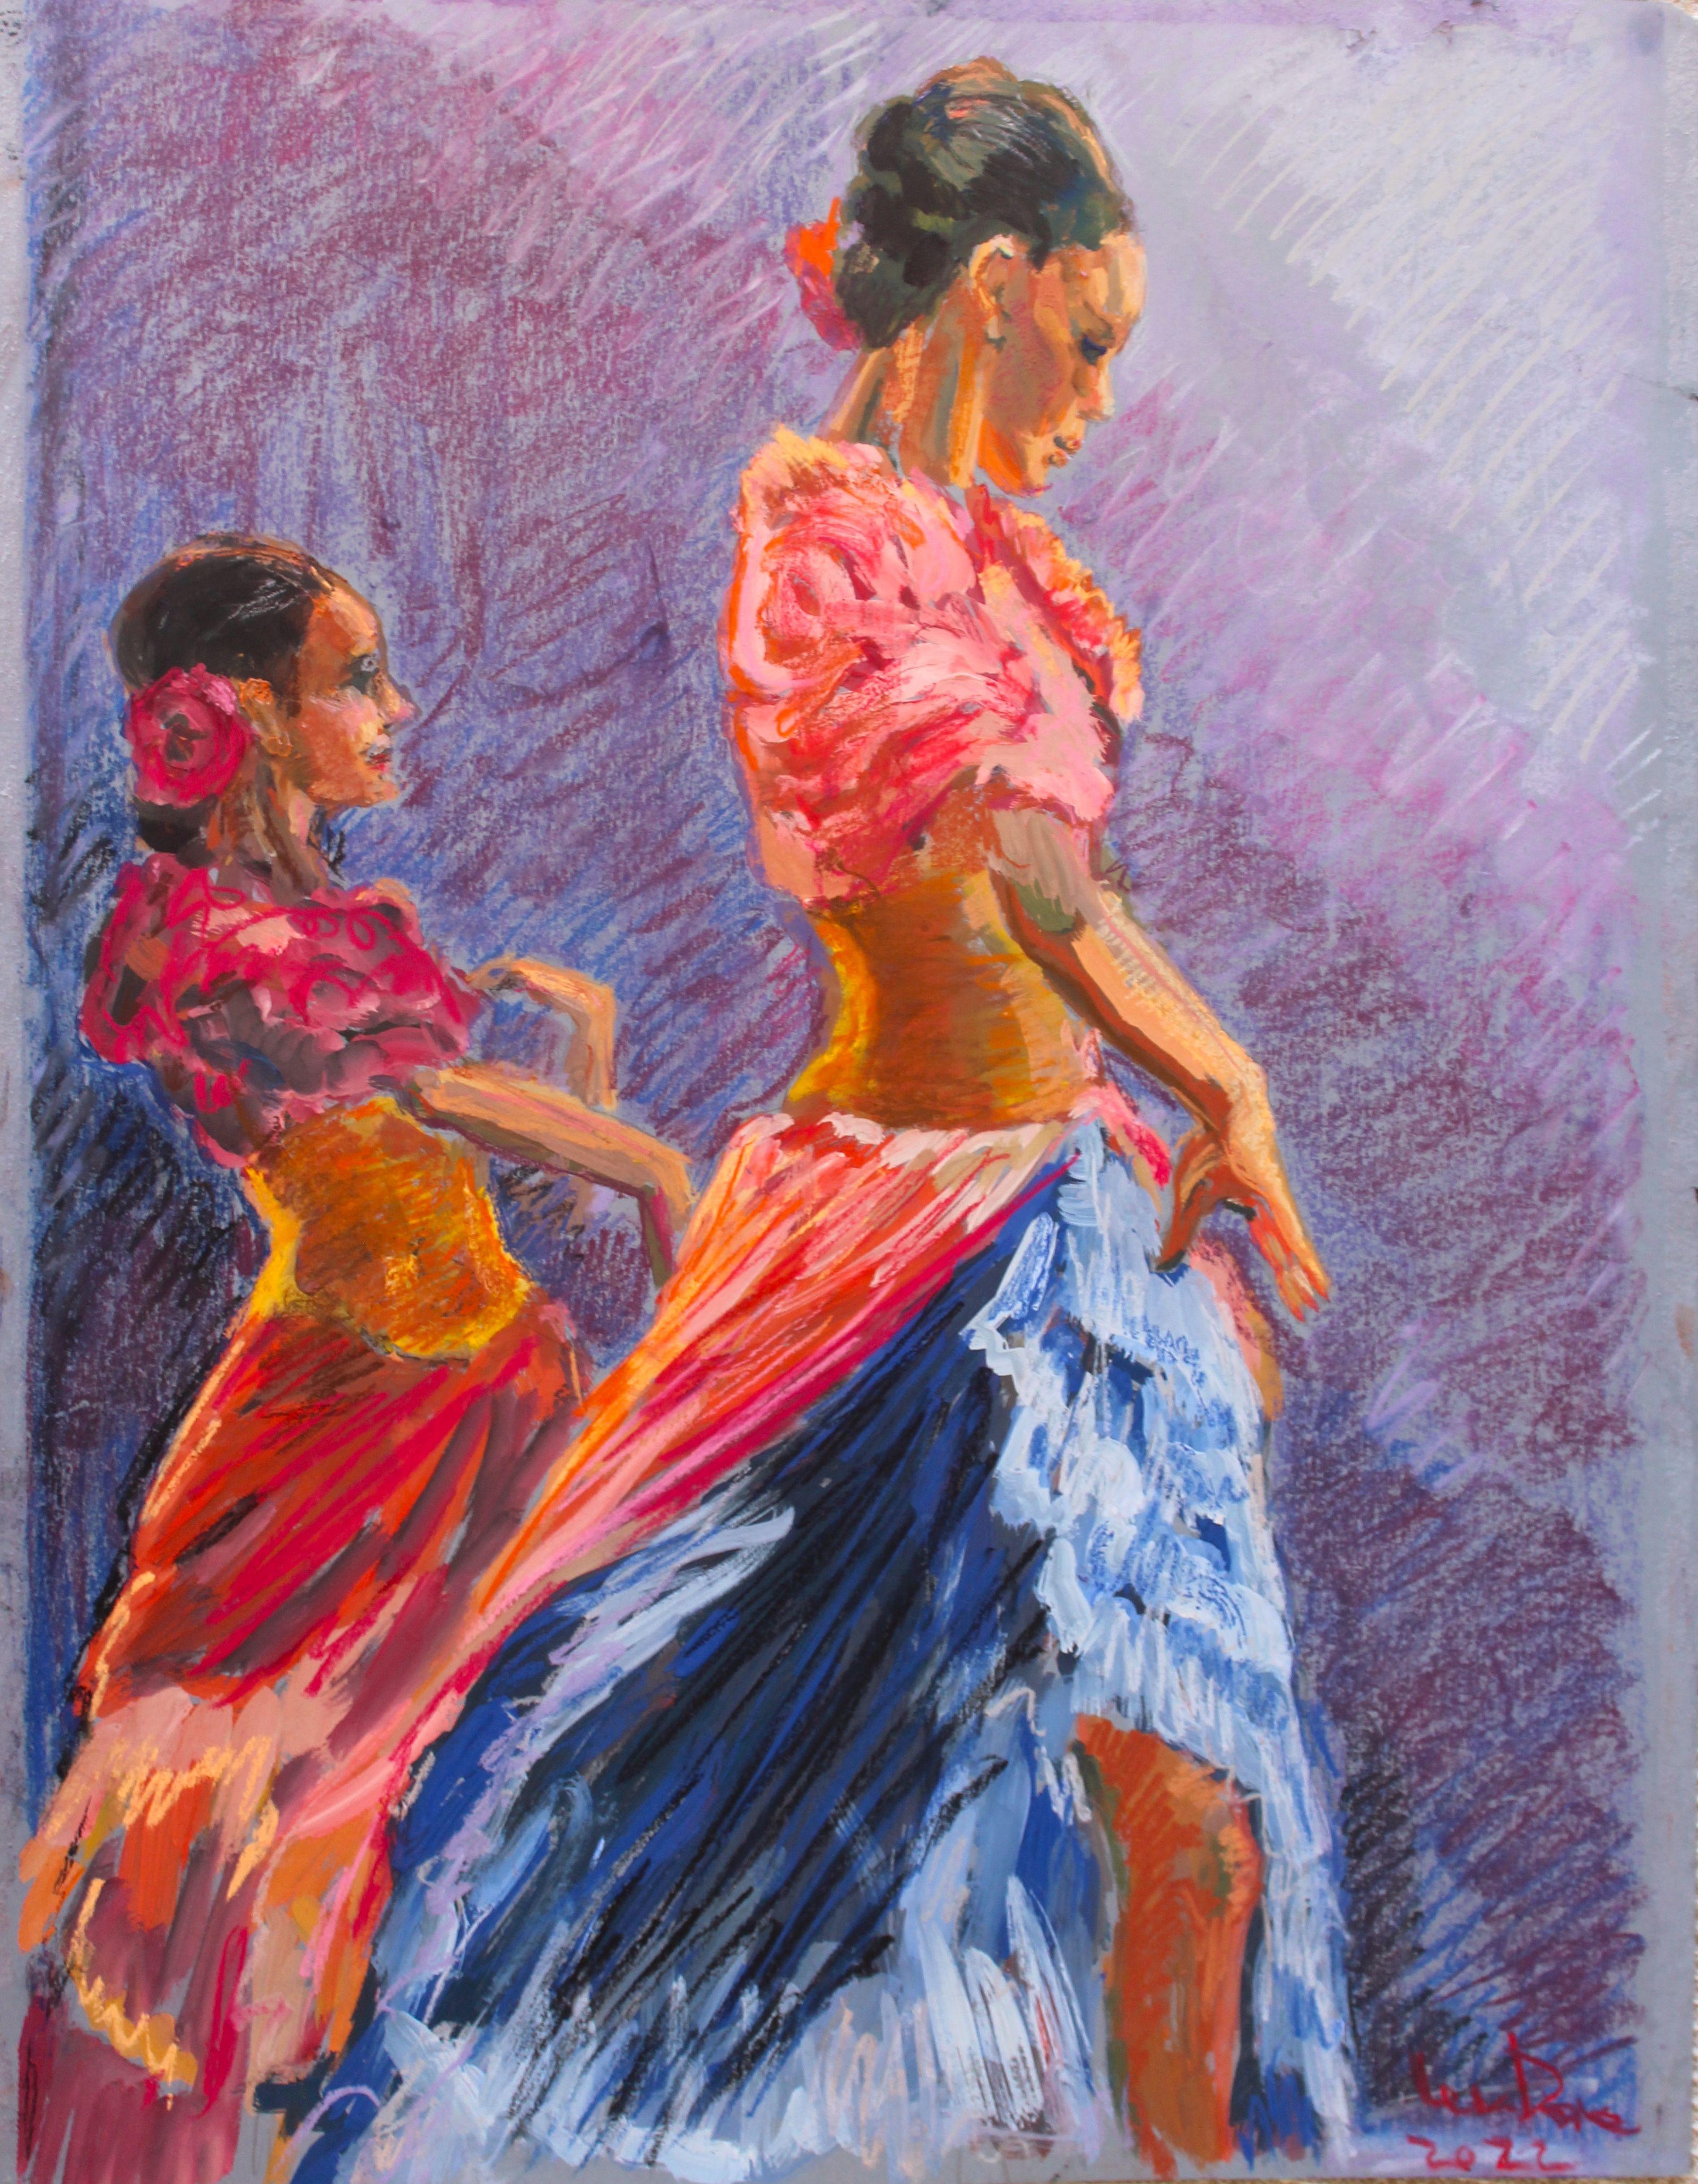 Silhouettes. Martha and Maria, Drawing, Pastels on Paper - Art by Elena Done